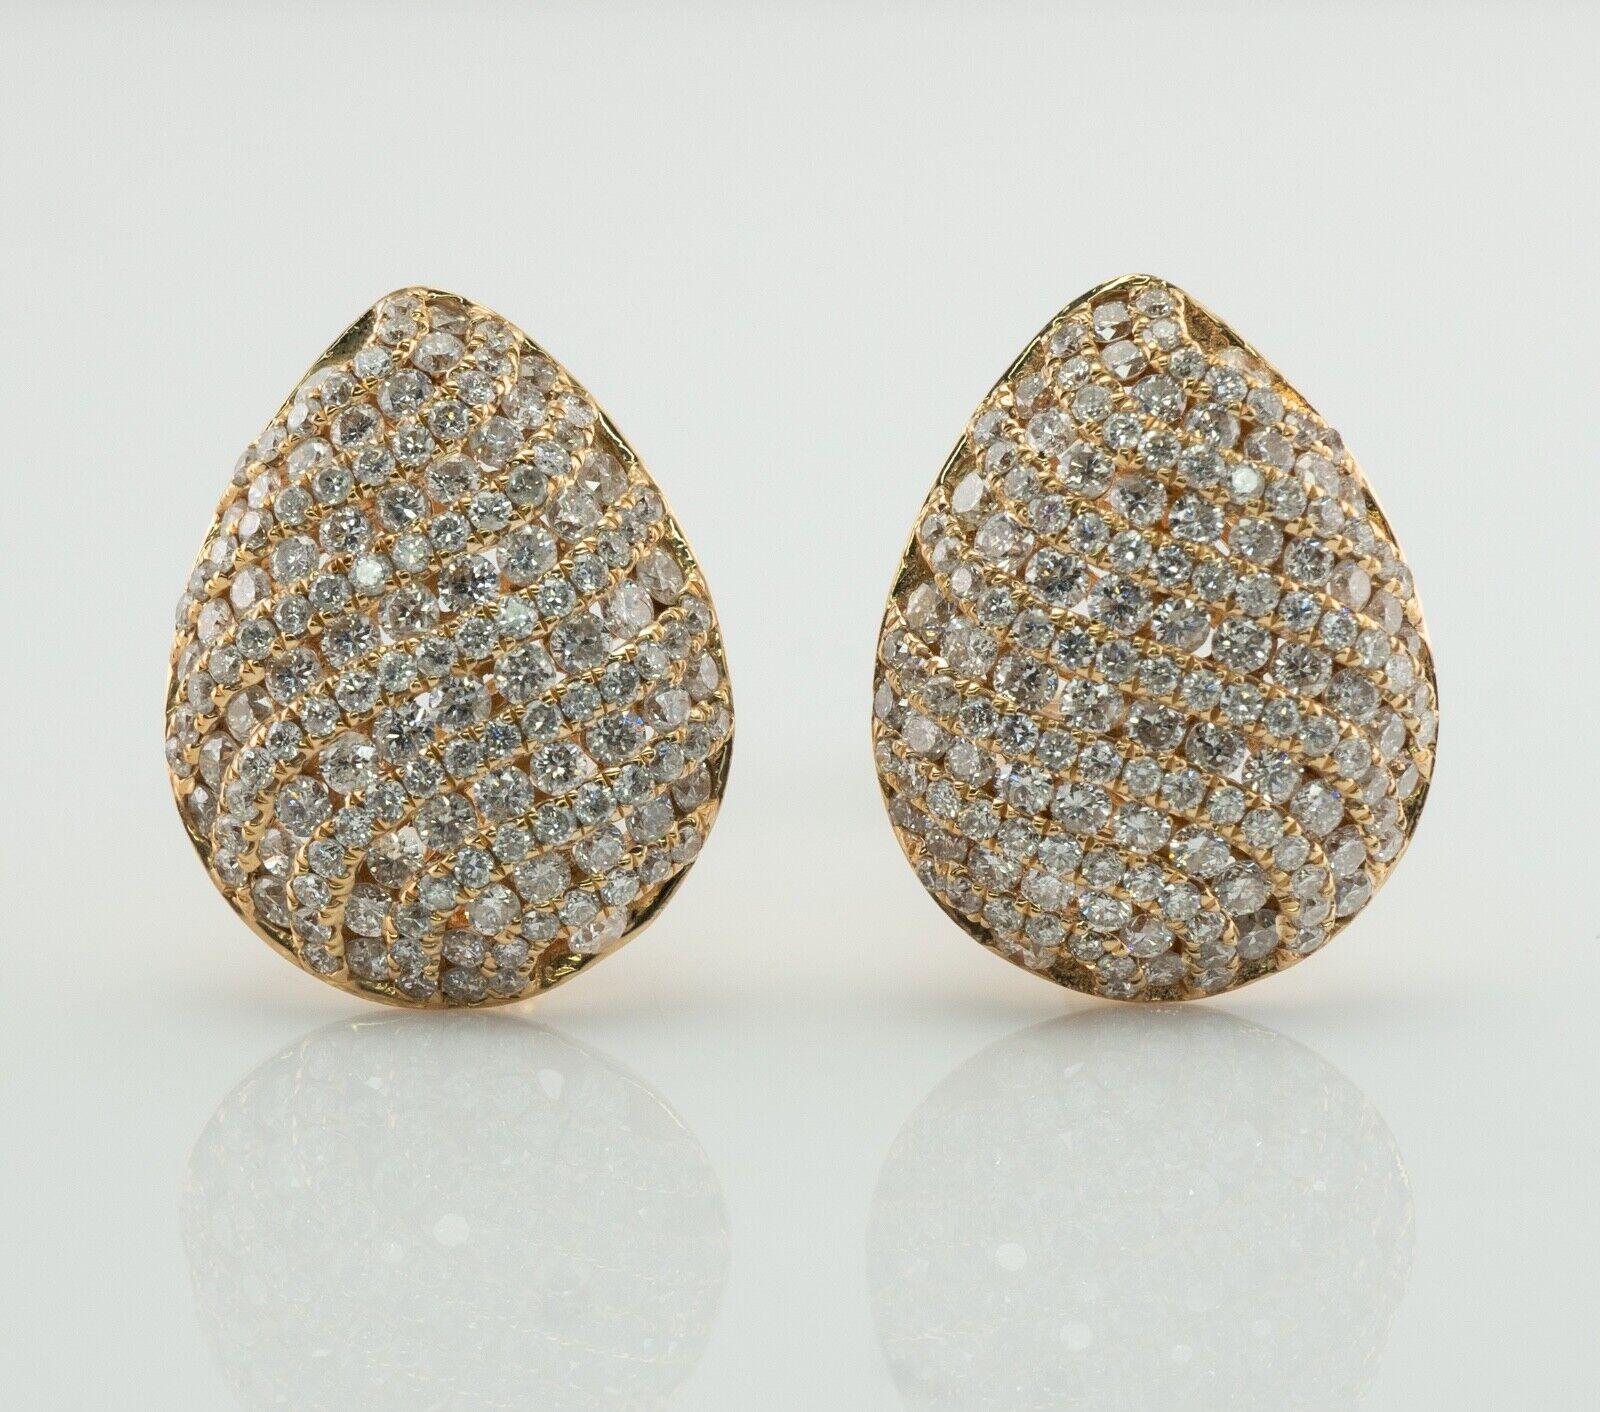 These estate diamond earrings are crafted in solid 14K Yellow Gold
Each earring is studded with 137 round cut diamonds.
The total diamond weight for the pair is 4.11 carats.
The diamonds are SI1 clarity and H color.
Each pear shape earring measures